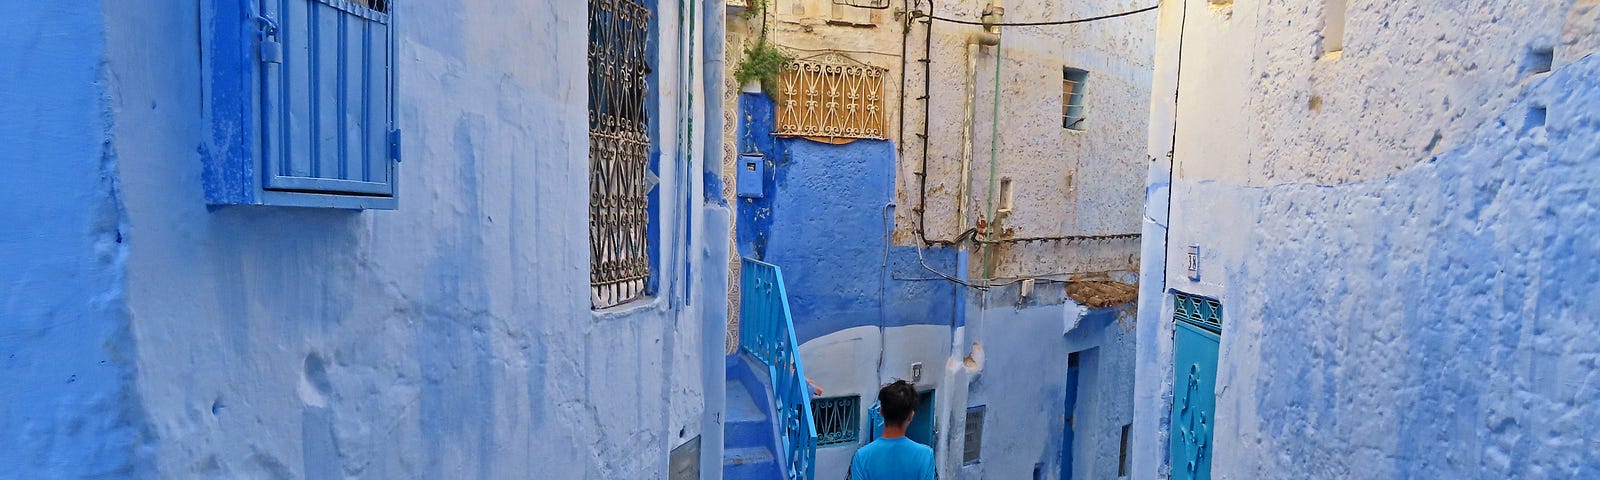 Man in a blue tshirt walks down a narrow street with blue, plastered buildings on either side. Blue doors, blue windows, blue stairs.